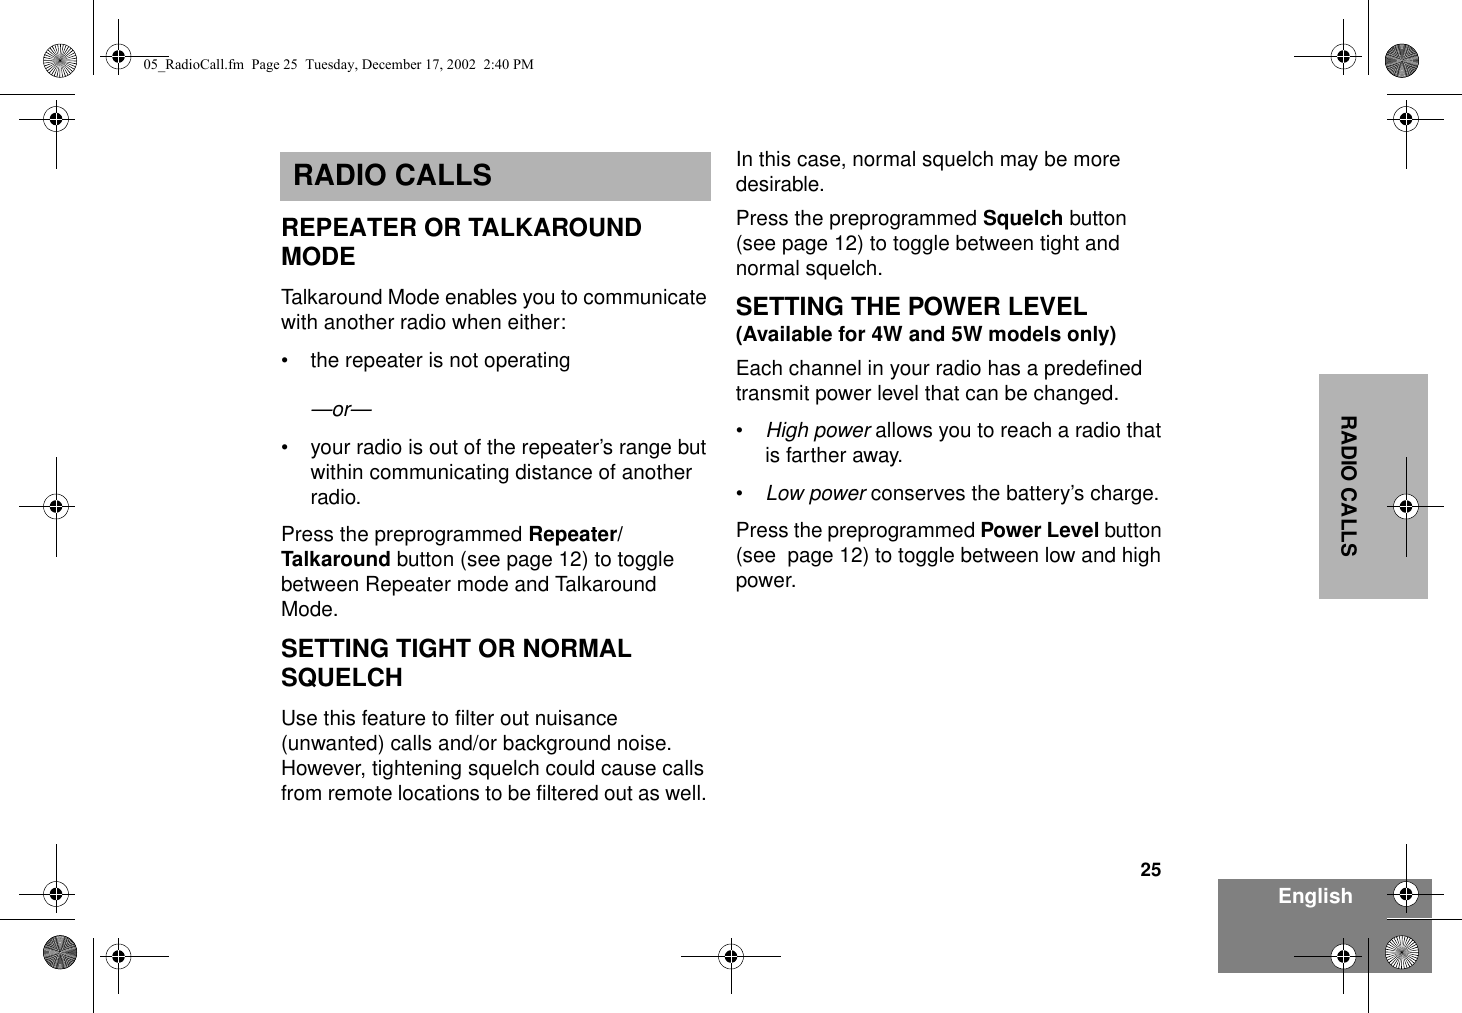 25EnglishRADIO CALLSRADIO CALLSREPEATER OR TALKAROUND MODETalkaround Mode enables you to communicate with another radio when either:• the repeater is not operating—or—• your radio is out of the repeater’s range but within communicating distance of another radio.Press the preprogrammed Repeater/Talkaround button (see page 12) to toggle between Repeater mode and Talkaround Mode.SETTING TIGHT OR NORMAL SQUELCHUse this feature to filter out nuisance (unwanted) calls and/or background noise. However, tightening squelch could cause calls from remote locations to be filtered out as well. In this case, normal squelch may be more desirable.Press the preprogrammed Squelch button (see page 12) to toggle between tight and normal squelch.SETTING THE POWER LEVEL(Available for 4W and 5W models only)Each channel in your radio has a predefined transmit power level that can be changed.•High power allows you to reach a radio that is farther away.•Low power conserves the battery’s charge.Press the preprogrammed Power Level button (see  page 12) to toggle between low and high power.05_RadioCall.fm  Page 25  Tuesday, December 17, 2002  2:40 PM